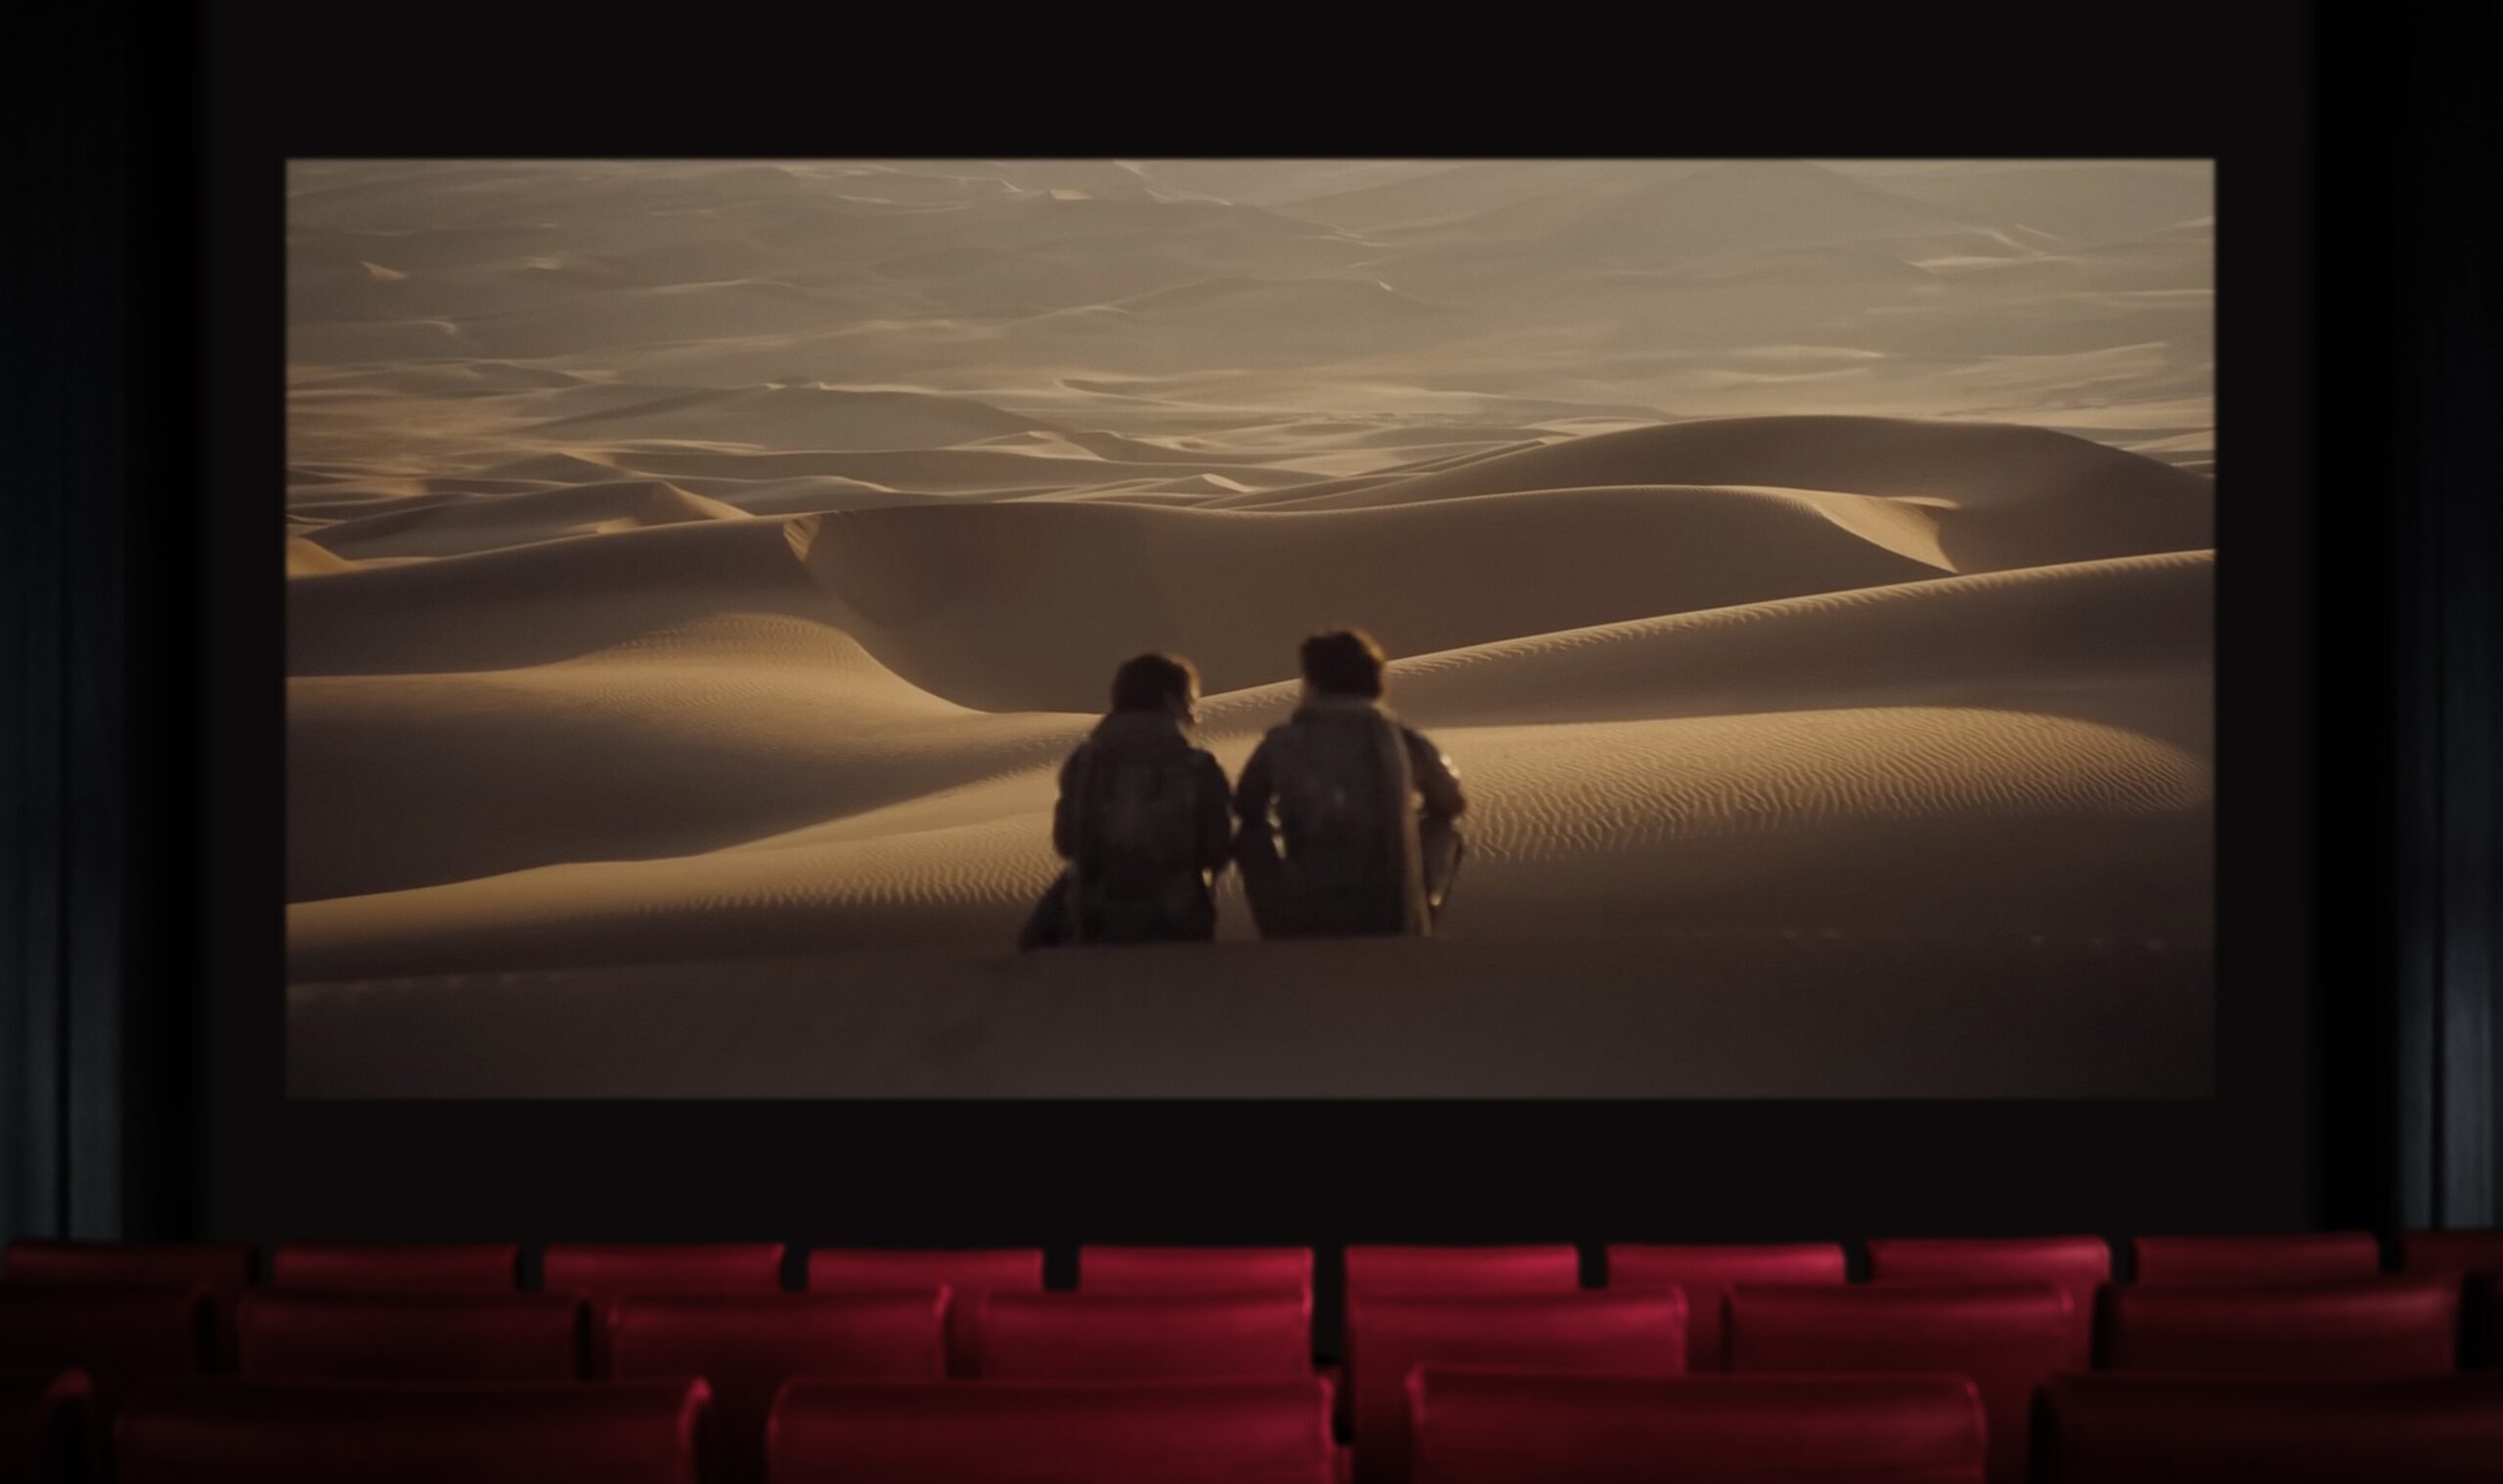 Dune,Part,Two,Movie,In,The,Cinema.,Watching,A,Movie